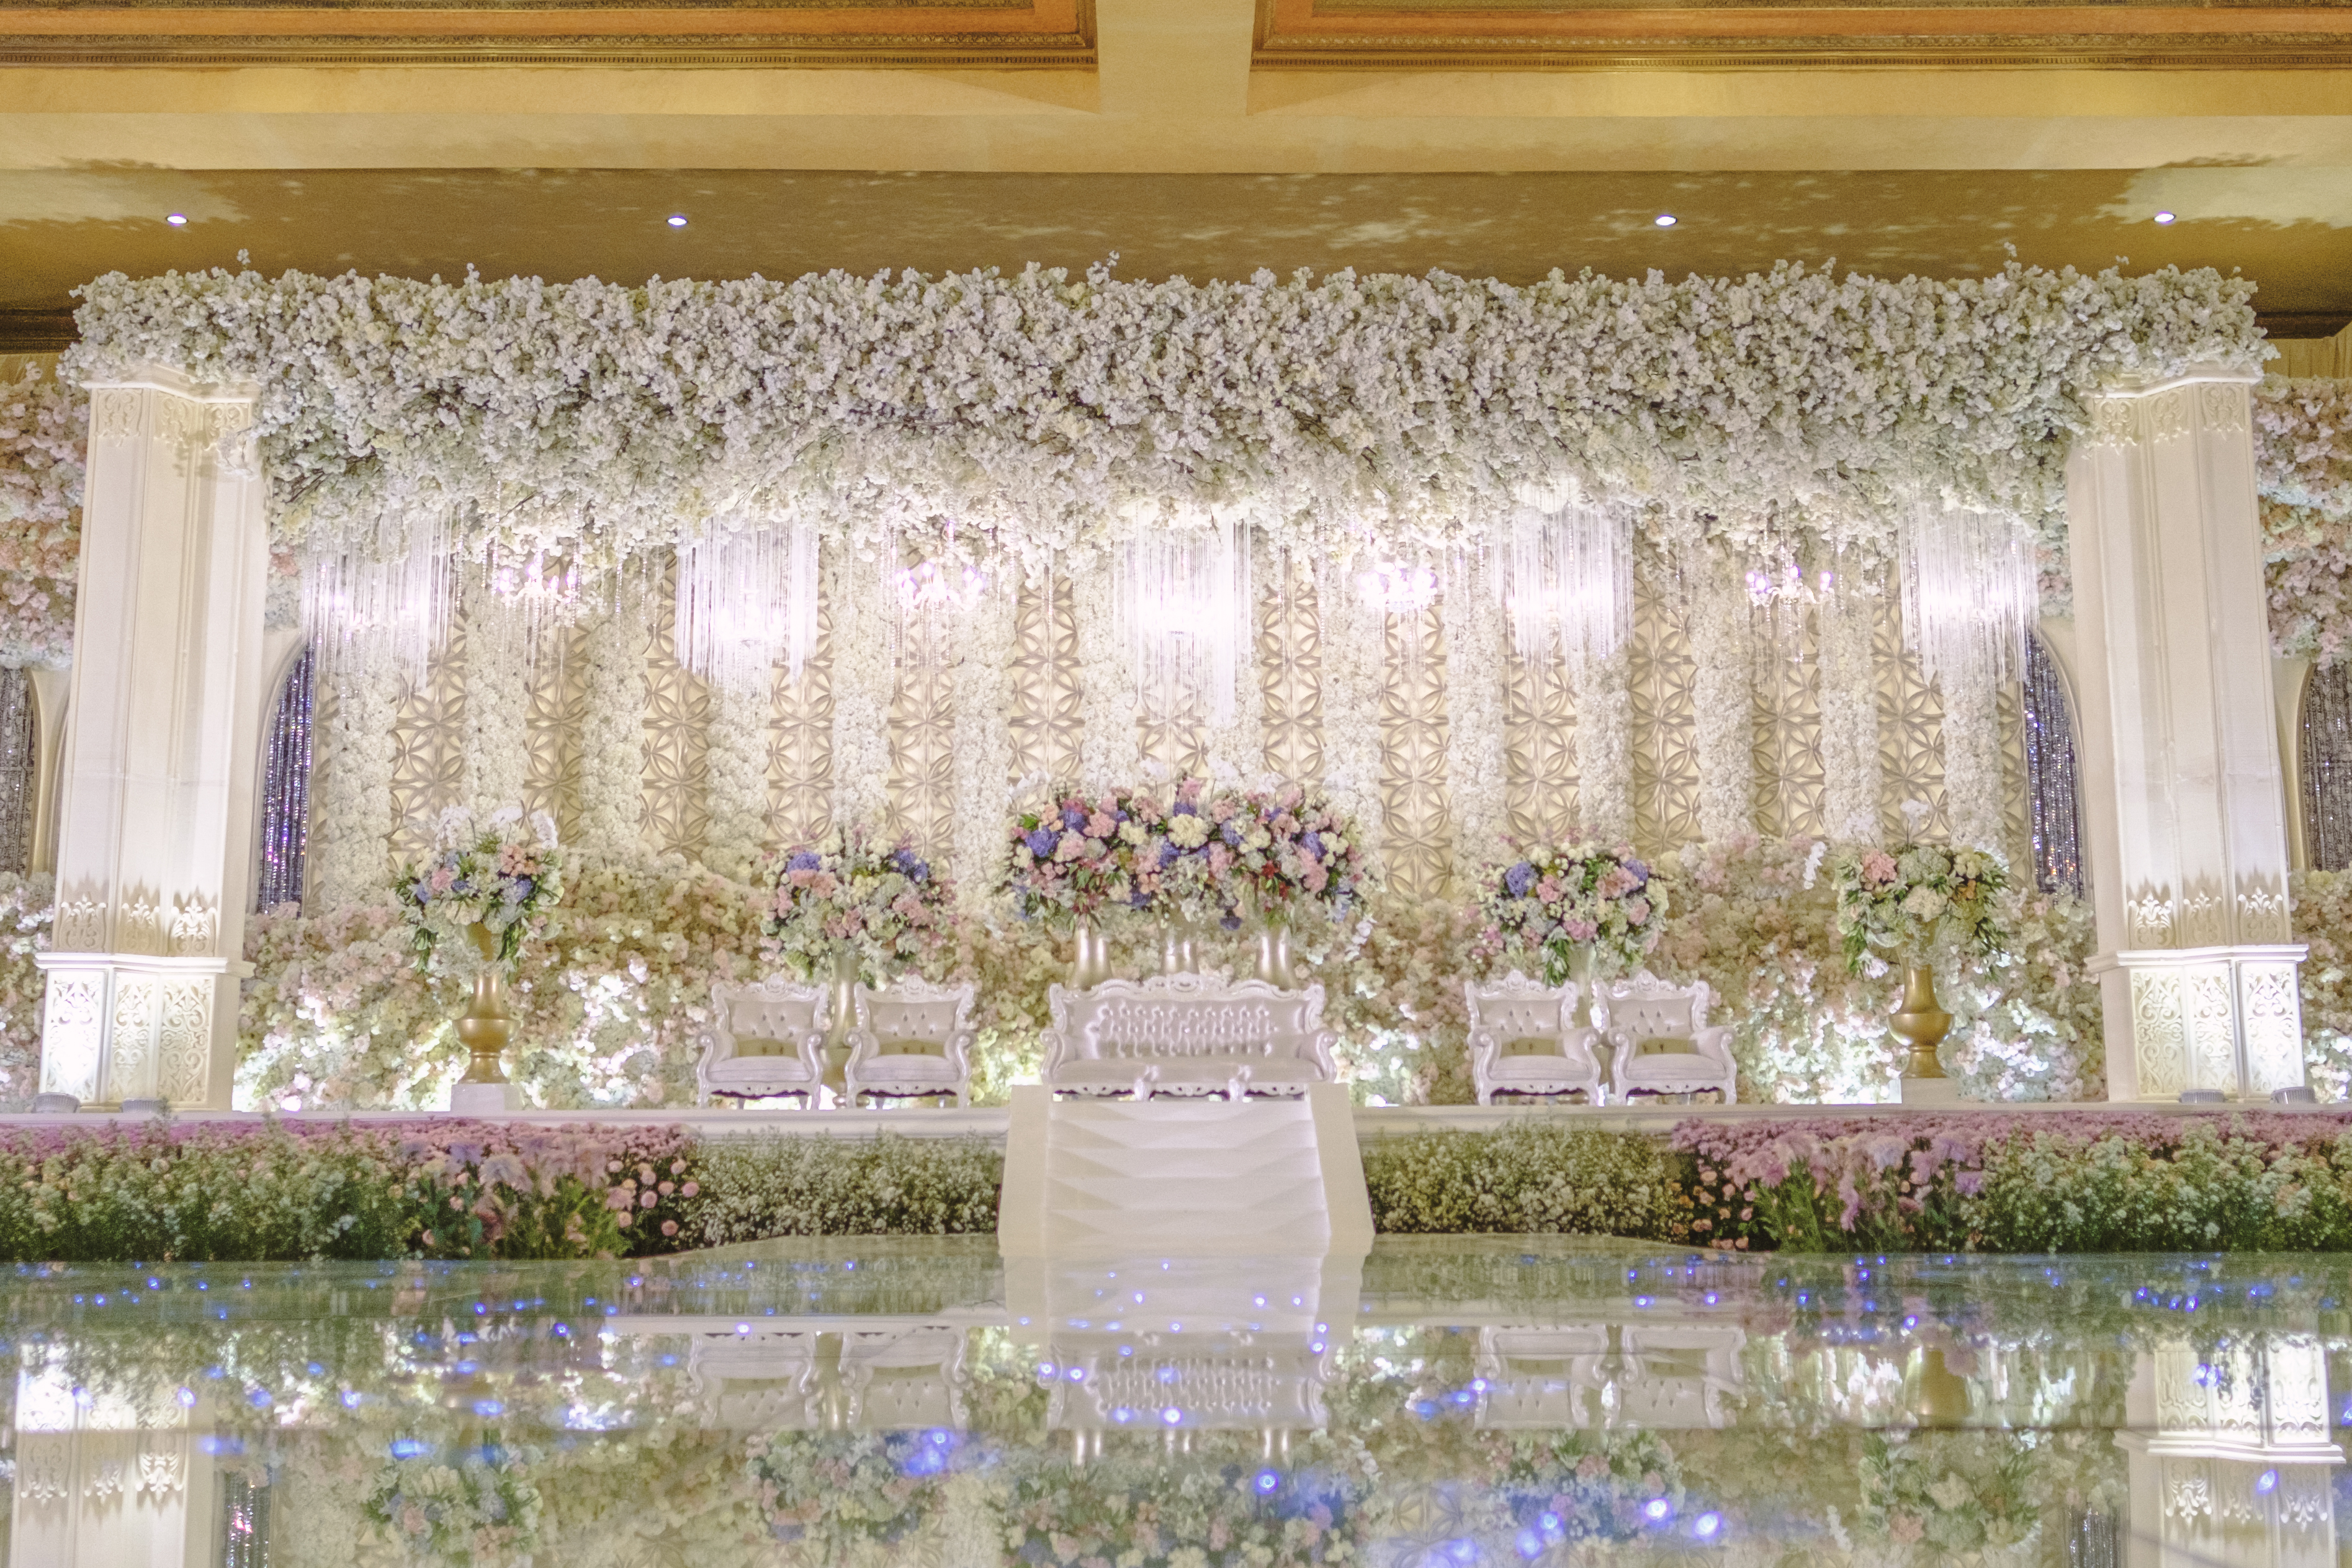 Regina and Erwin's Wedding Reception | Venue at Balai Samudera | Decoration by White Pearl Decoration | Lighting by Lightworks